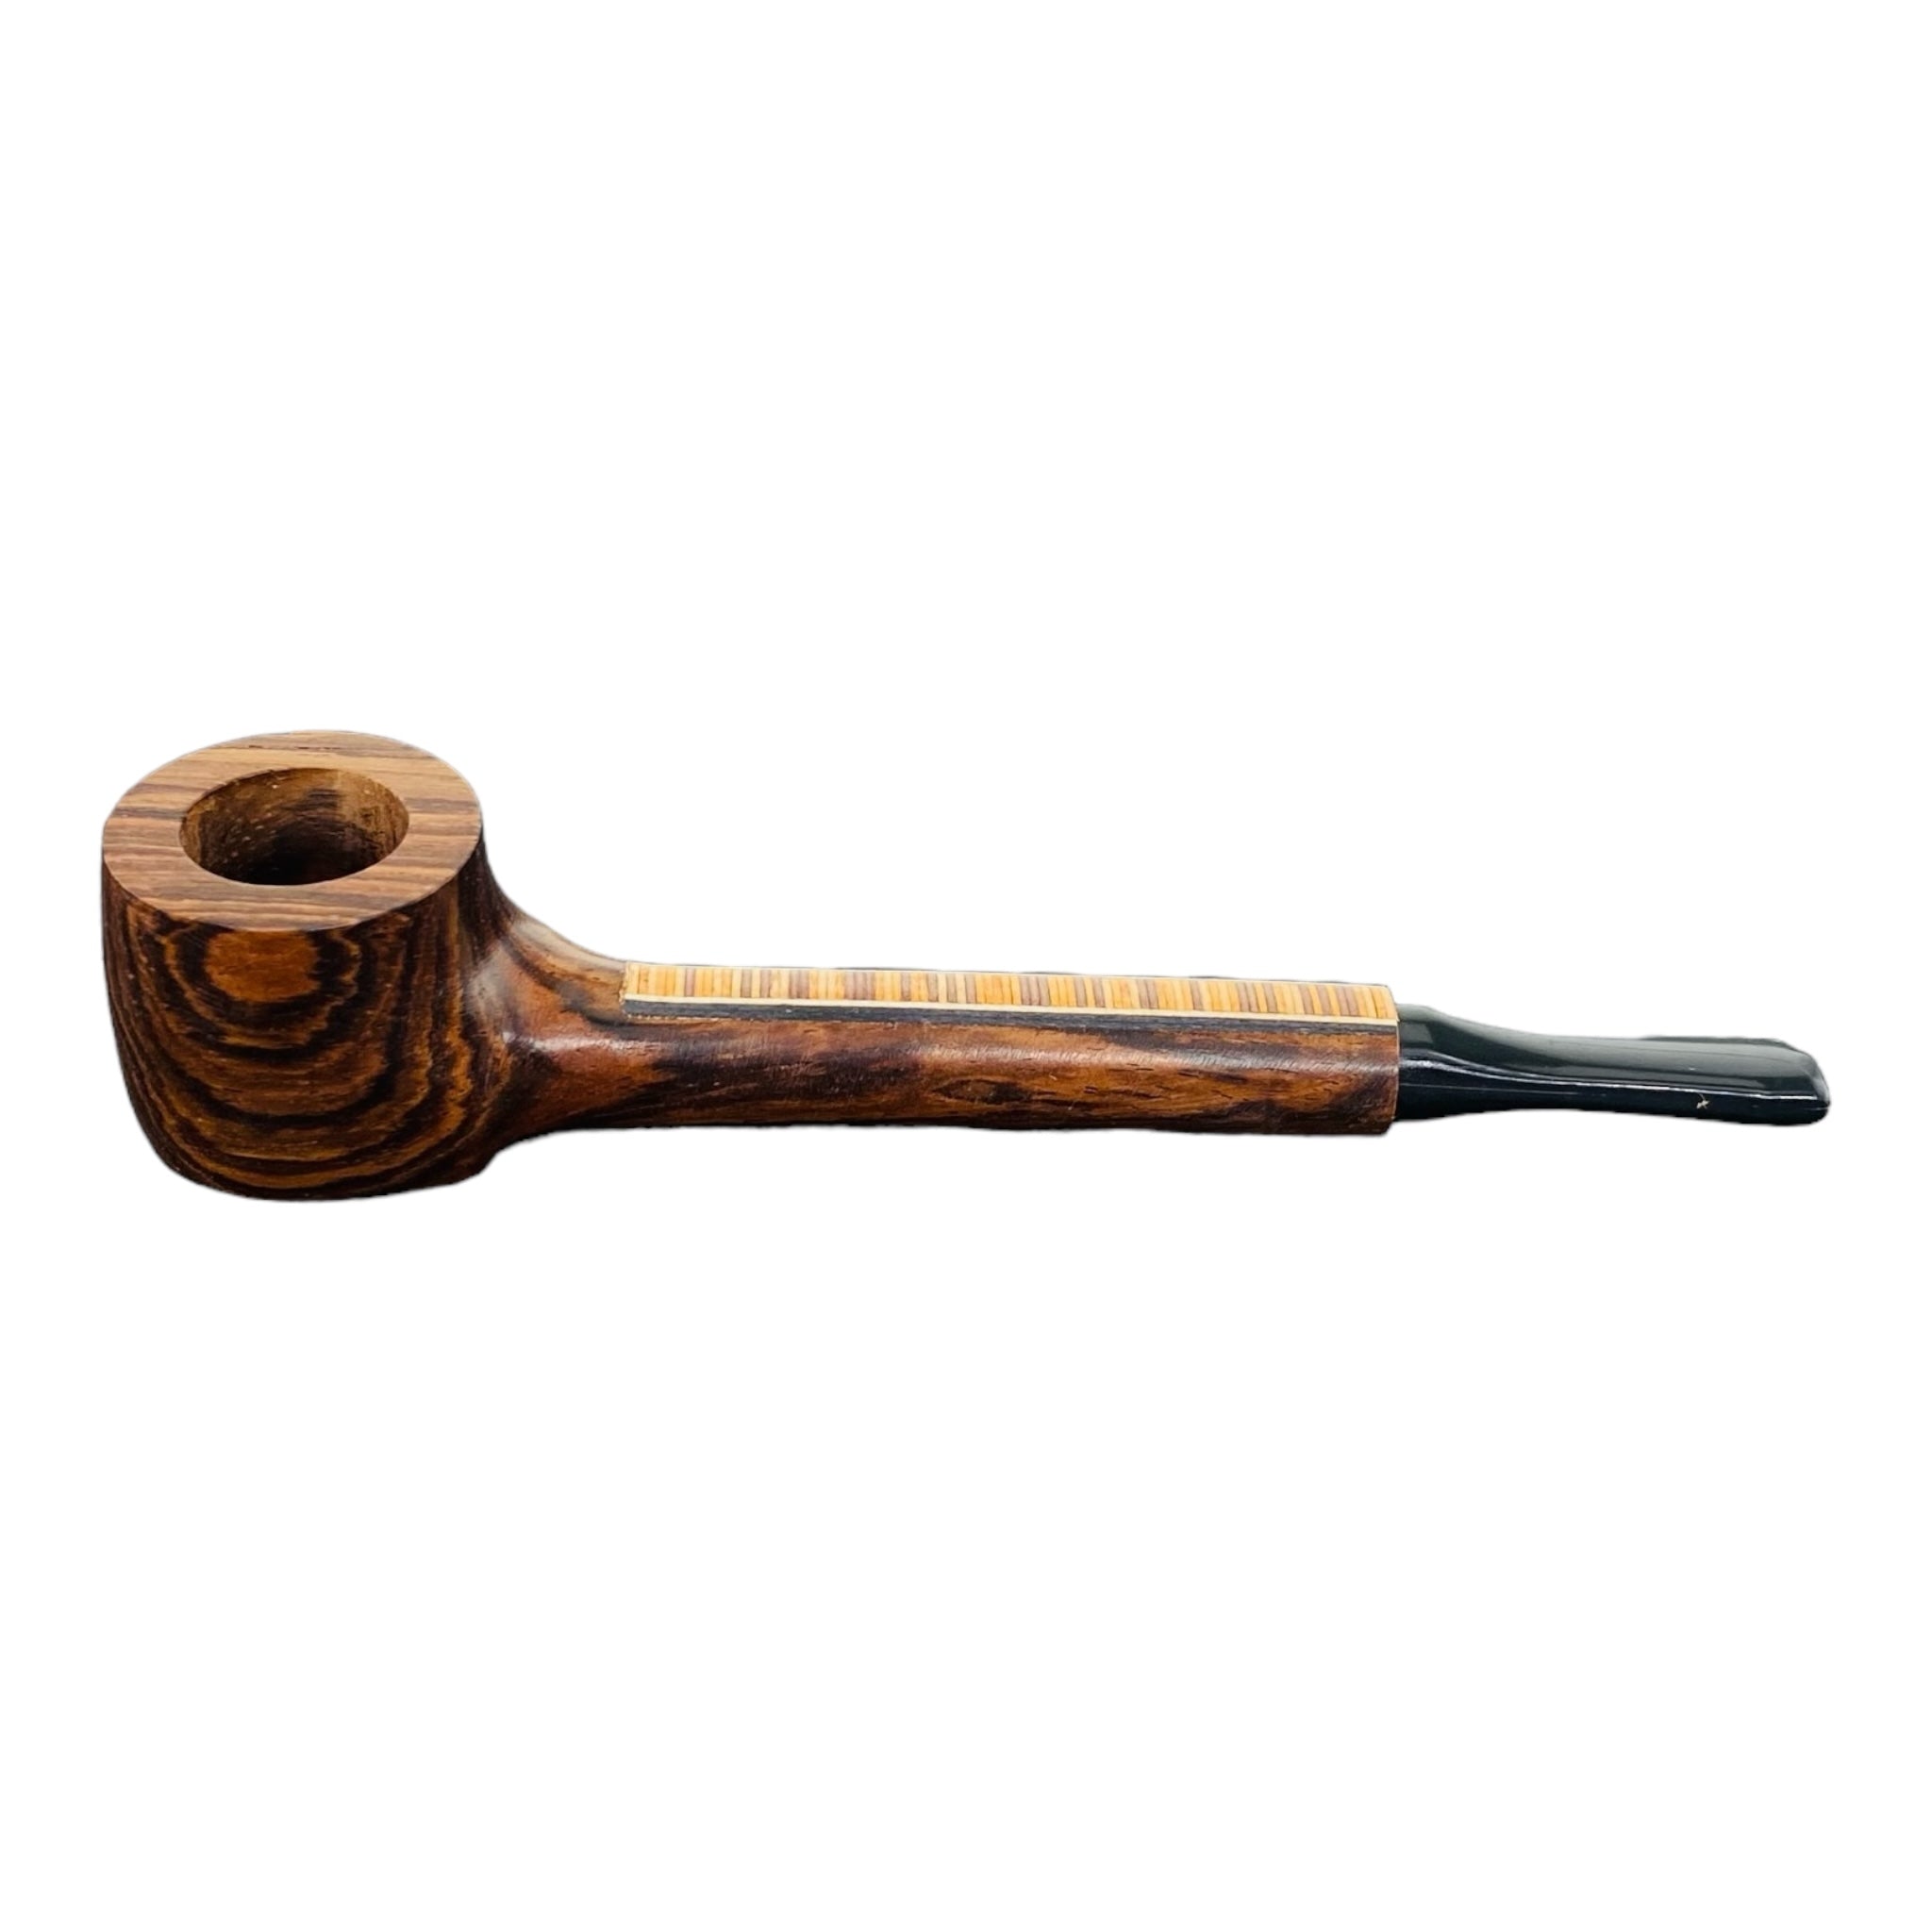 Wood Hand Pipe - Long Skinny Stem With Wood Inlay And Plastic Mouthpiece